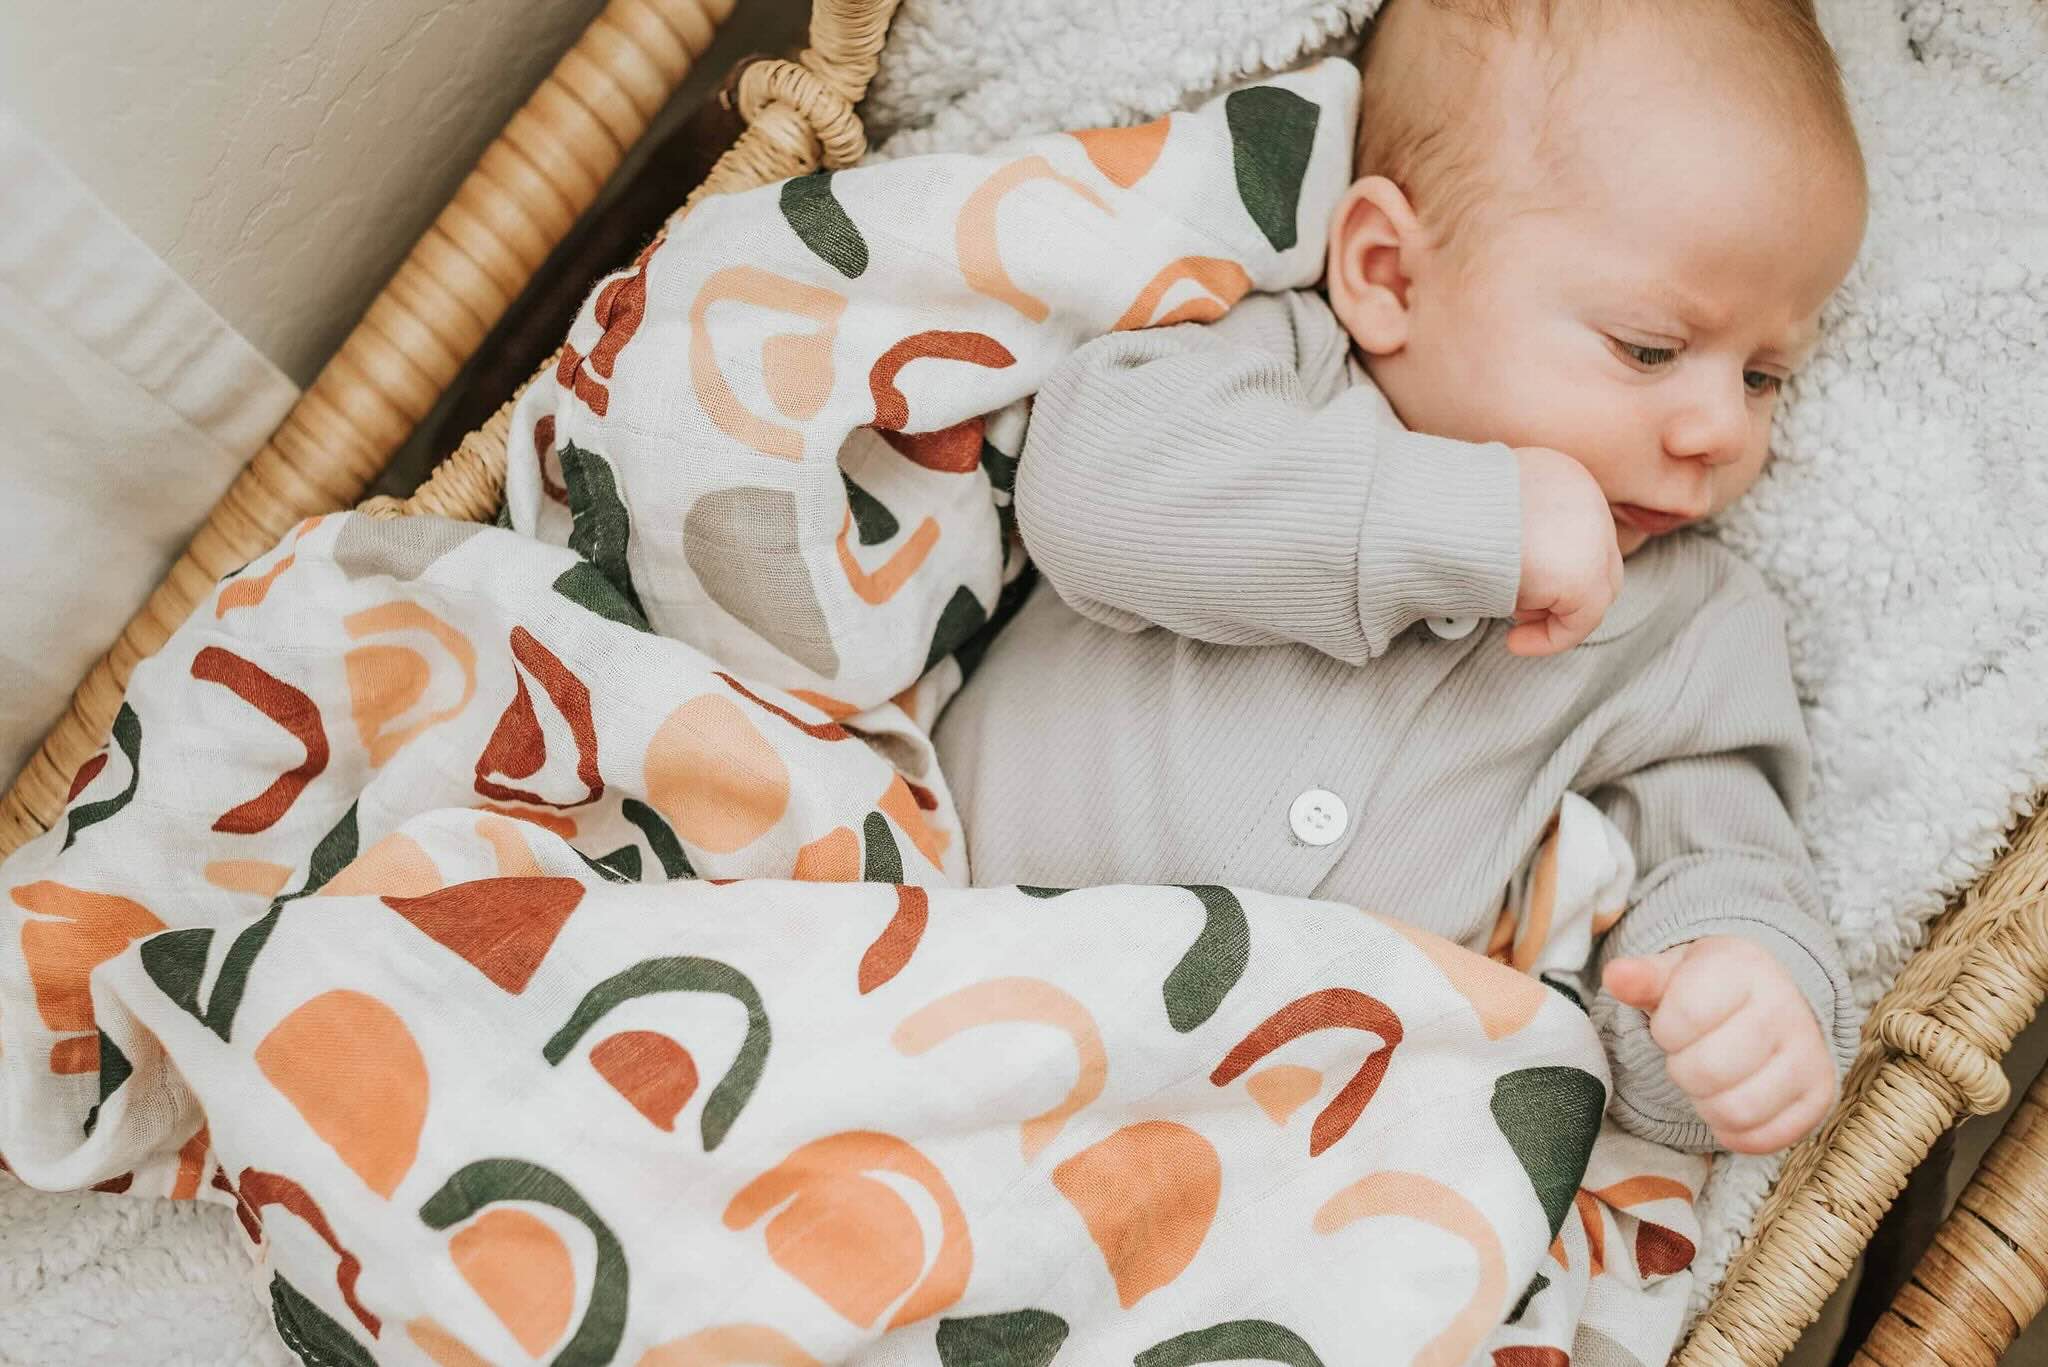 Swaddle Blankets Review: Top Picks for Comfort and Quality